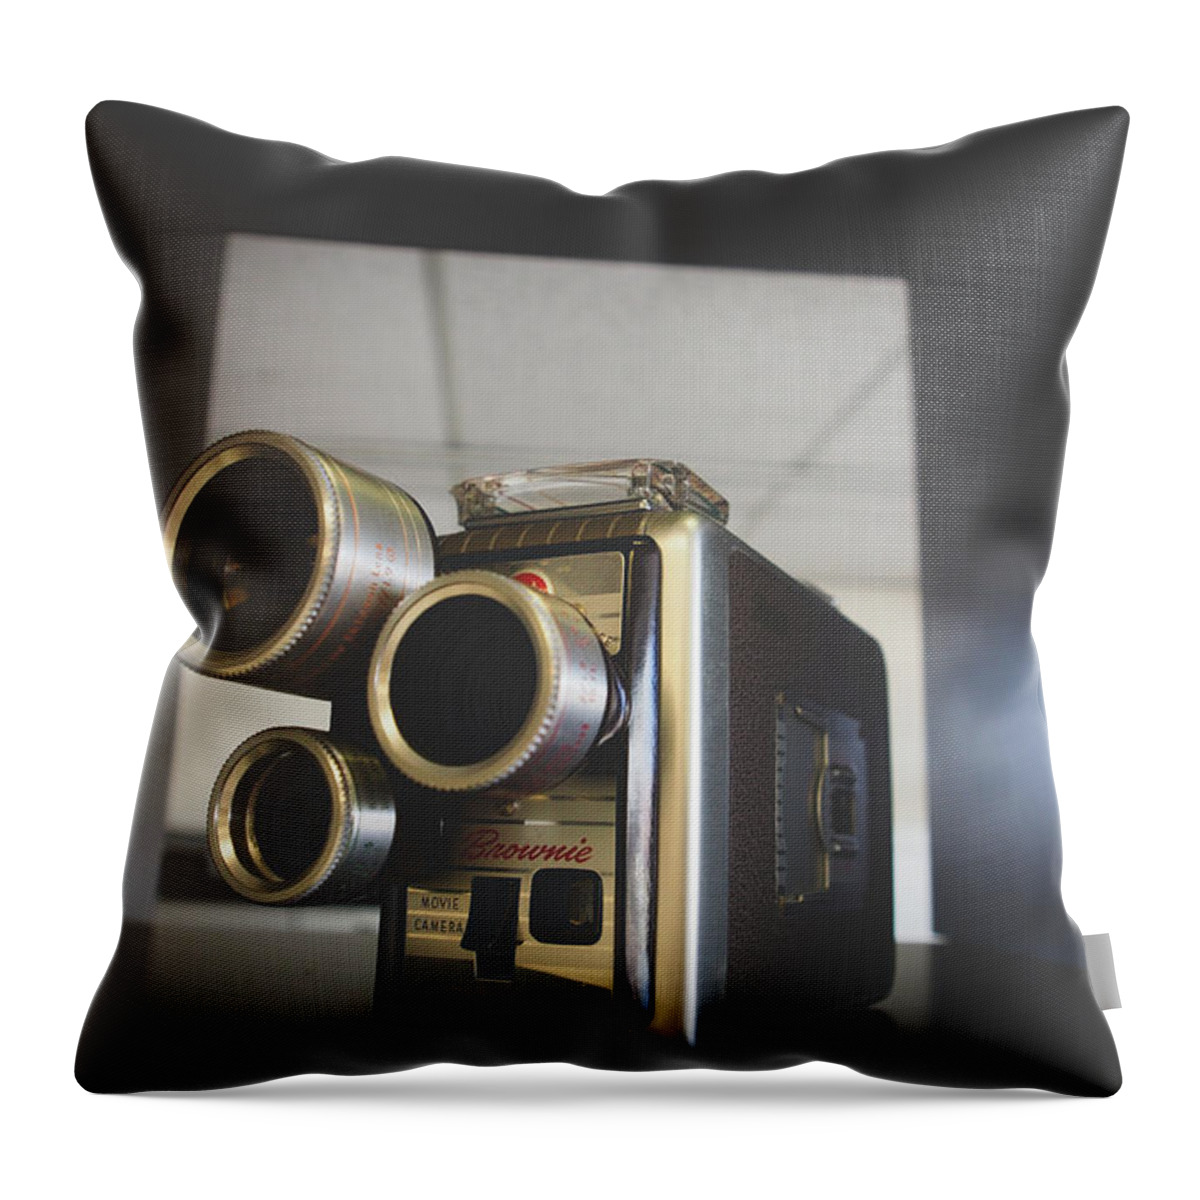 Brownie Camera Throw Pillow featuring the photograph Brownie Camera by Alex Leaming